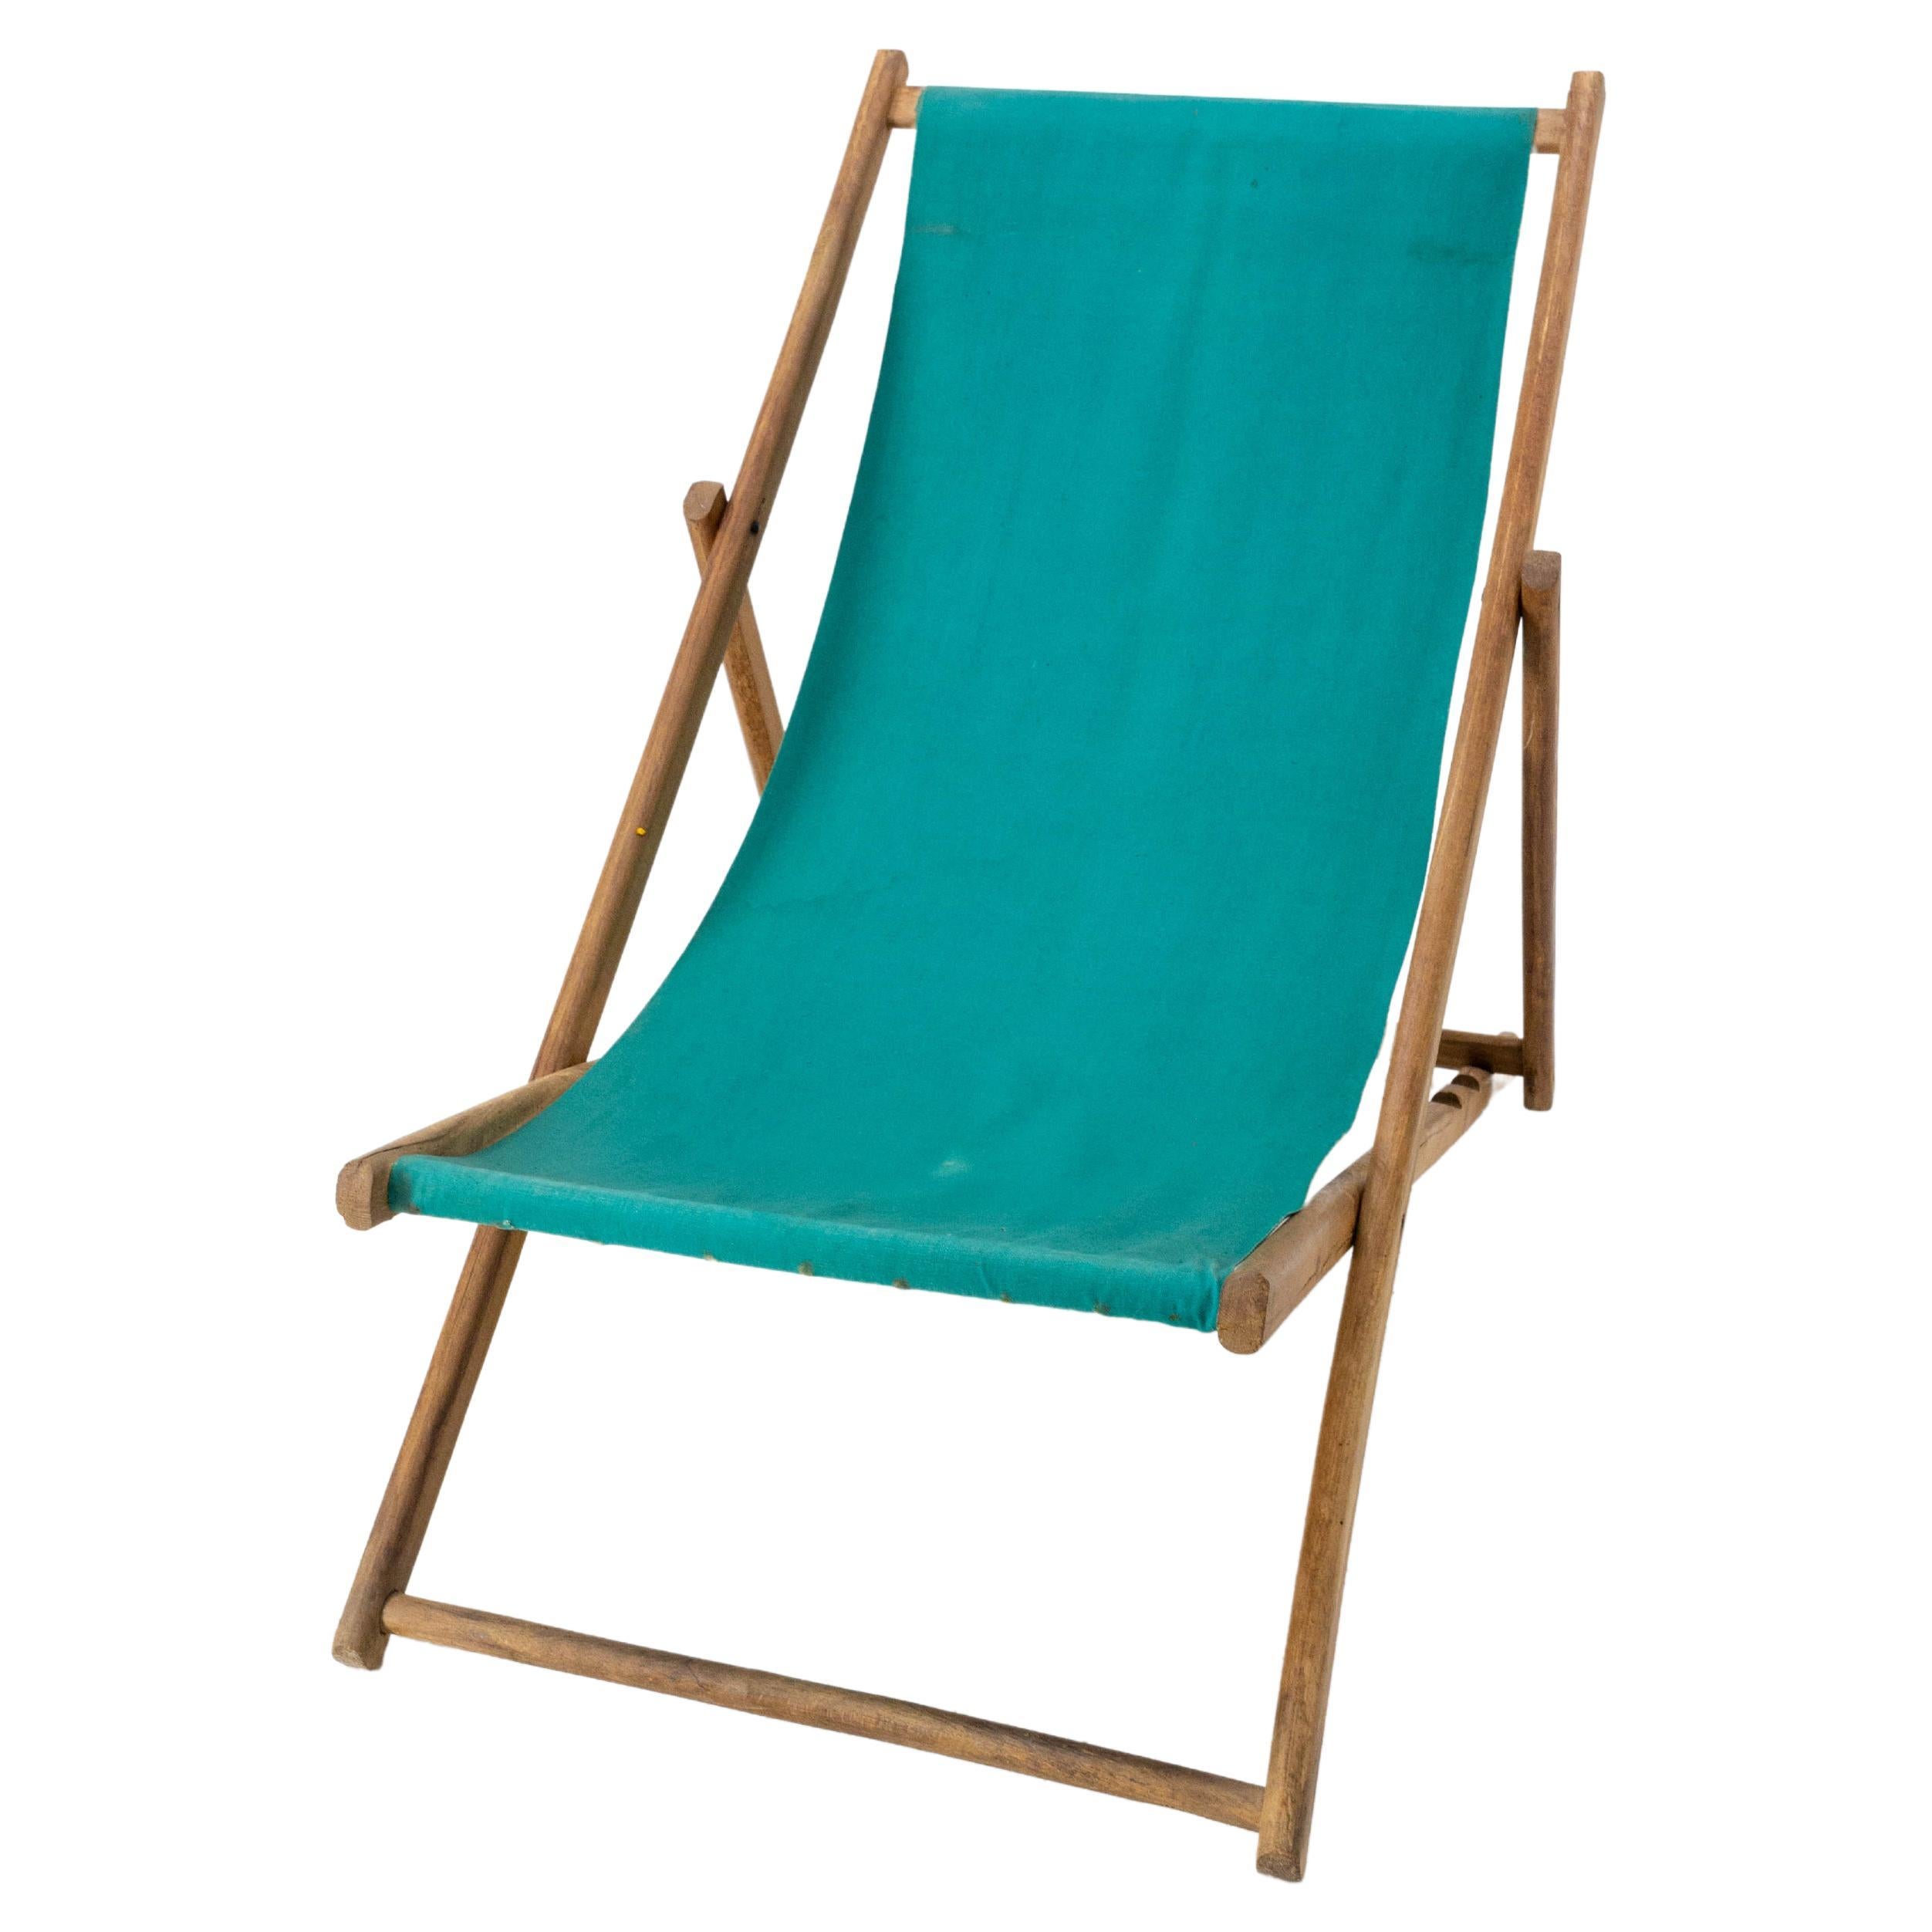 Transat Folding Deck Chair Patio Lounger, Beech and Fabric Chaise Longue, French For Sale